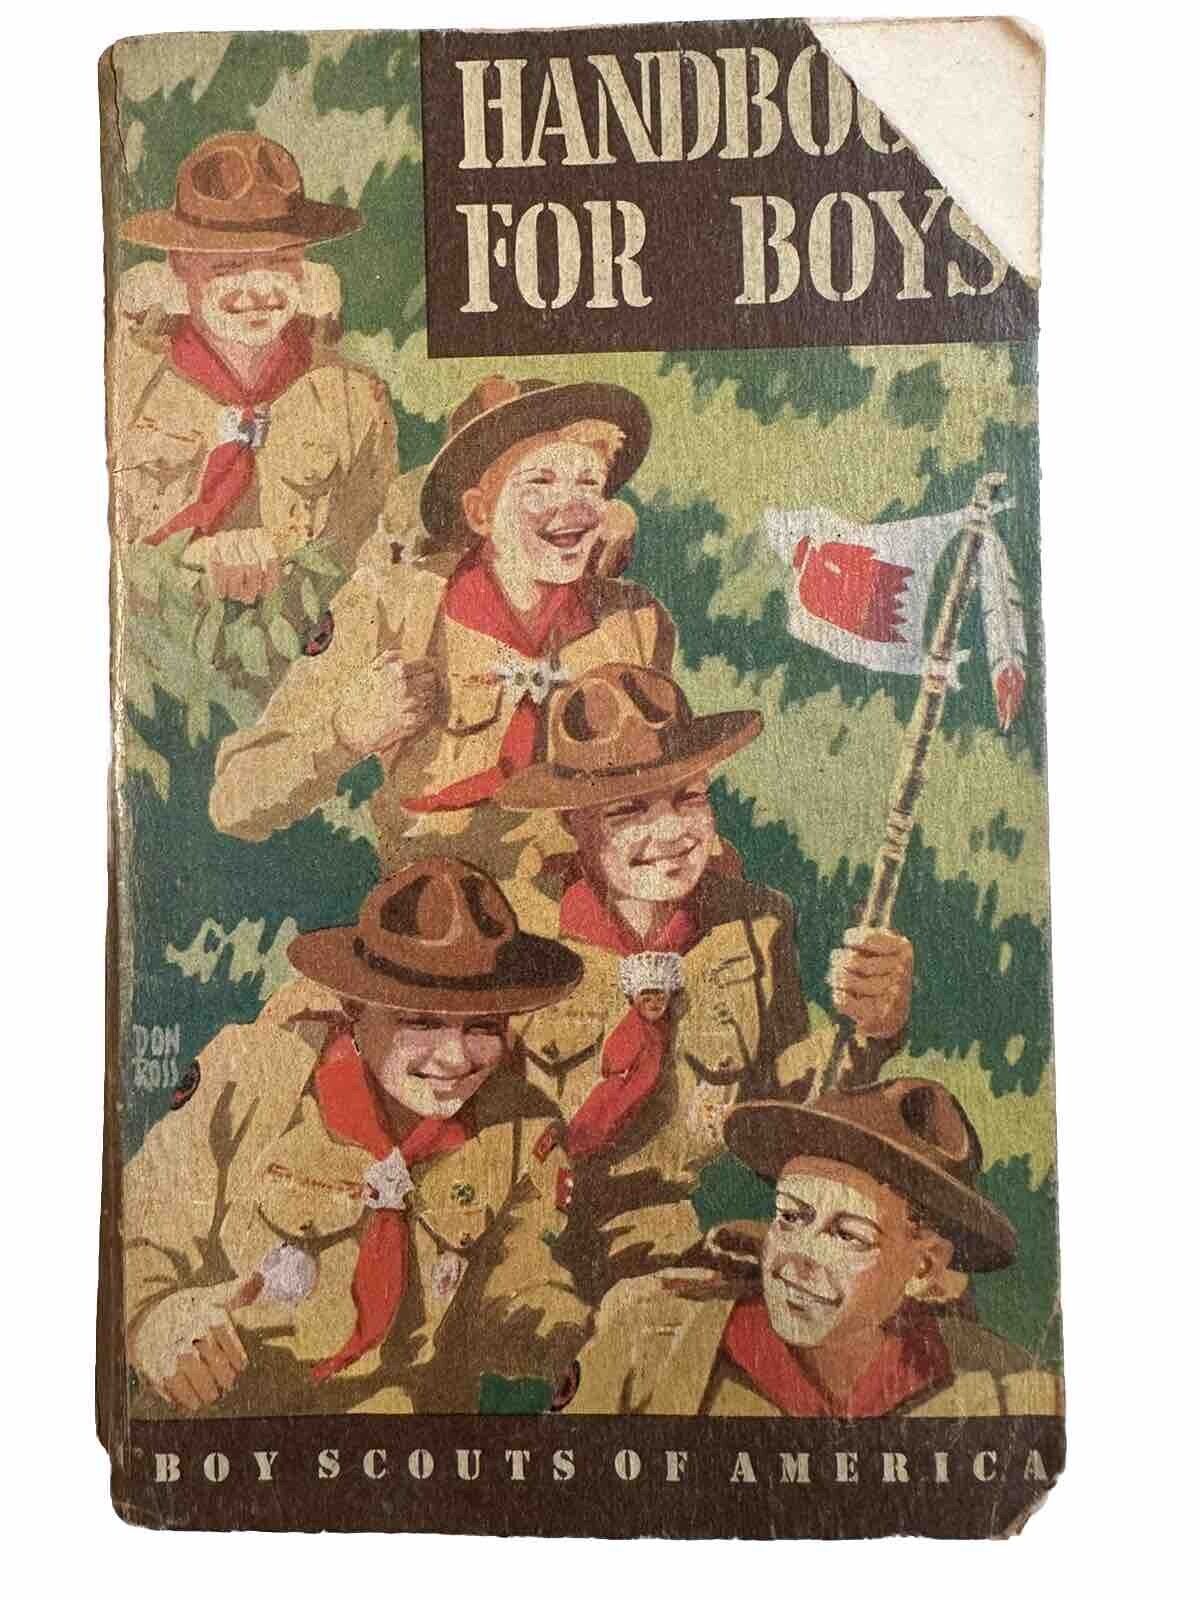 Handbook For Boys Boy Scouts Of America 1949 5th Edition 2nd Printing